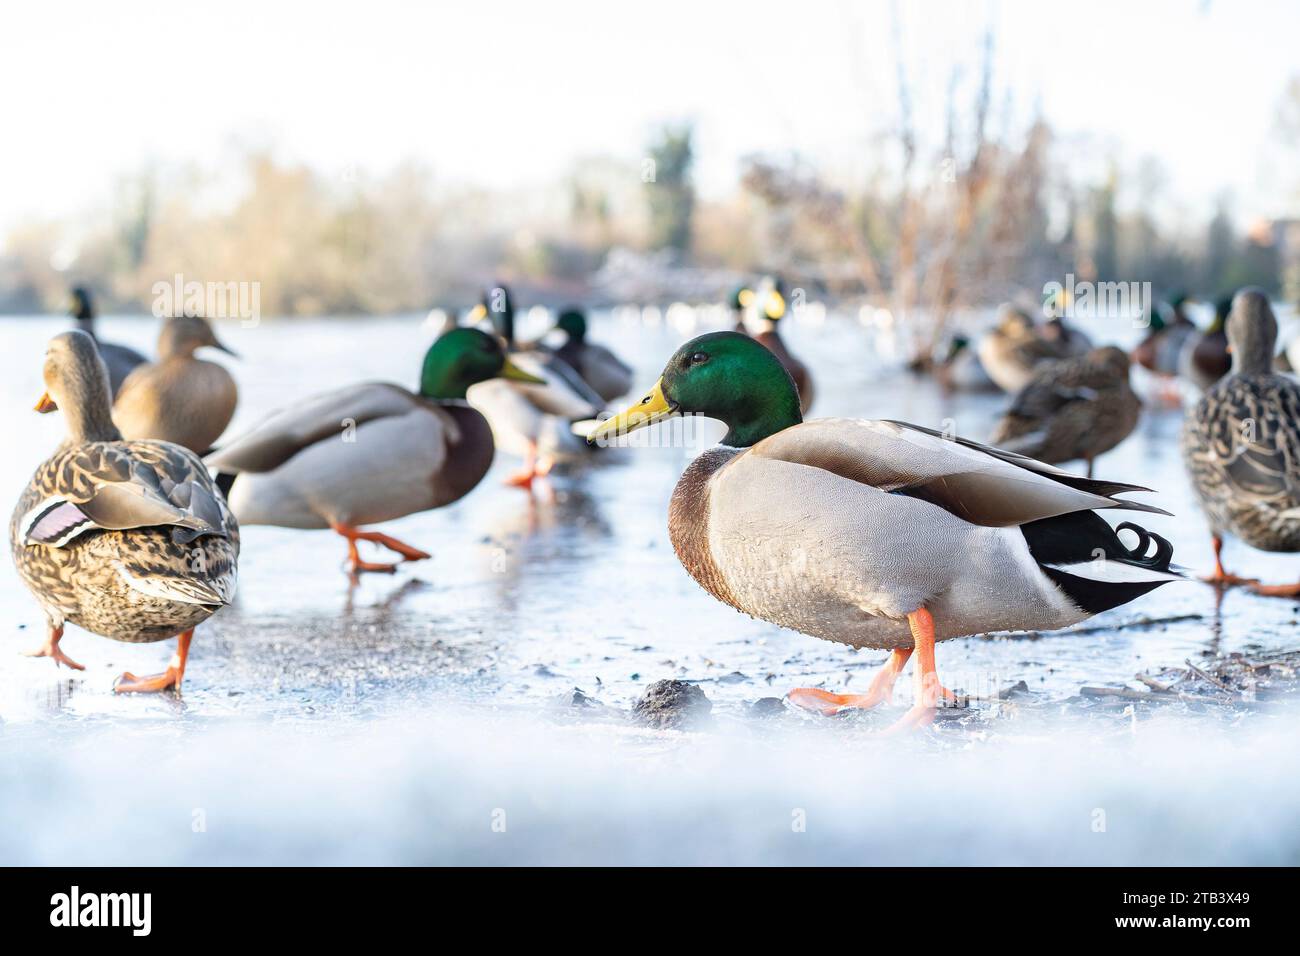 Kidderminster, UK. 1st December, 2023. UK weather: a severe freeze hits the Midlands this morning. Temperatures remain below freezing even when the sun breaks through. Mallard ducks stand patiently on a frozen pond waiting for the moment the ice will melt. Credit: Lee Hudson/Alamy Stock Photo